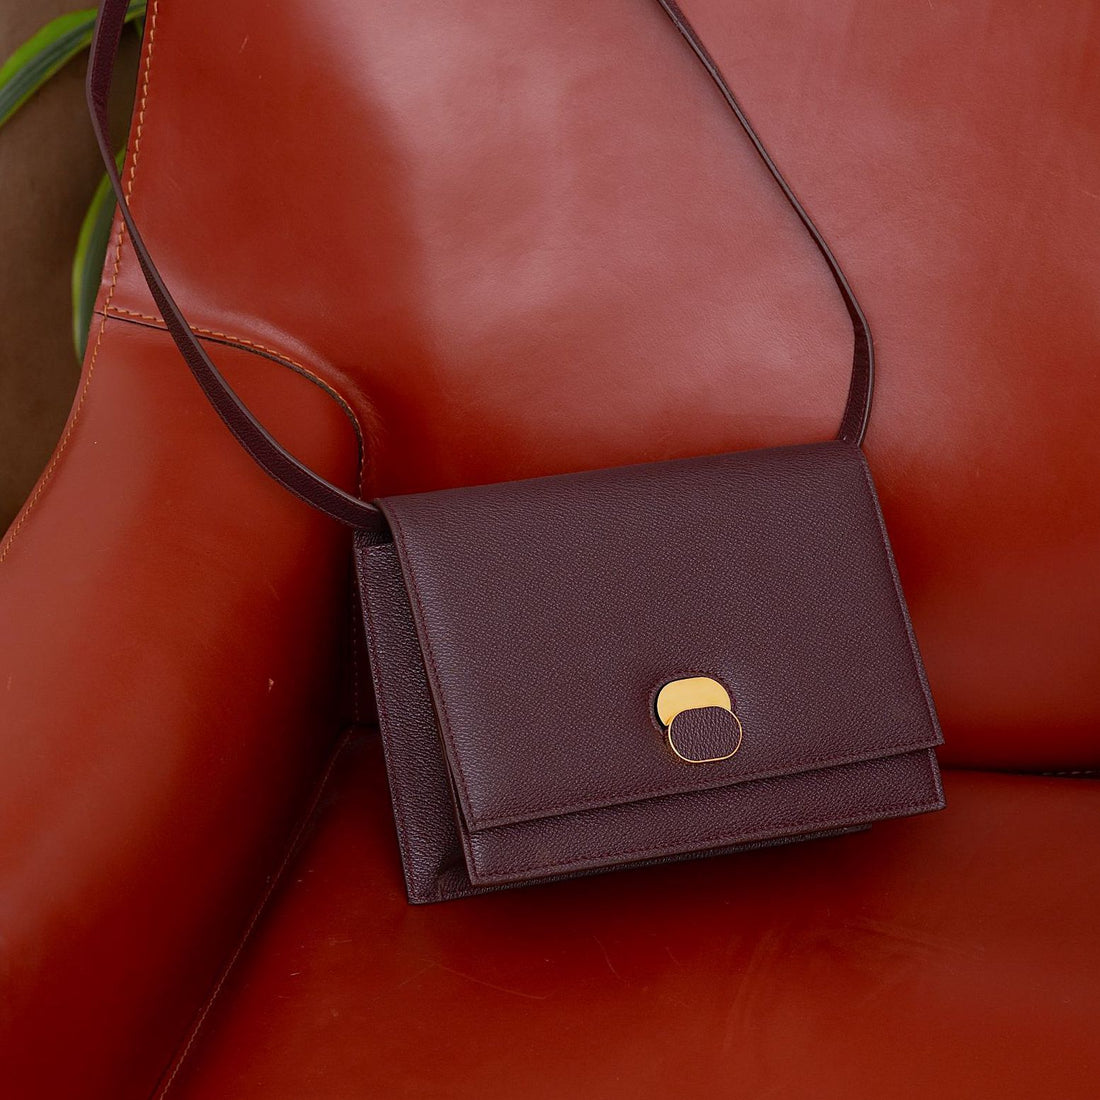 VEGAN LEATHER- HOW SUSTAINABLE IS IT REALLY?